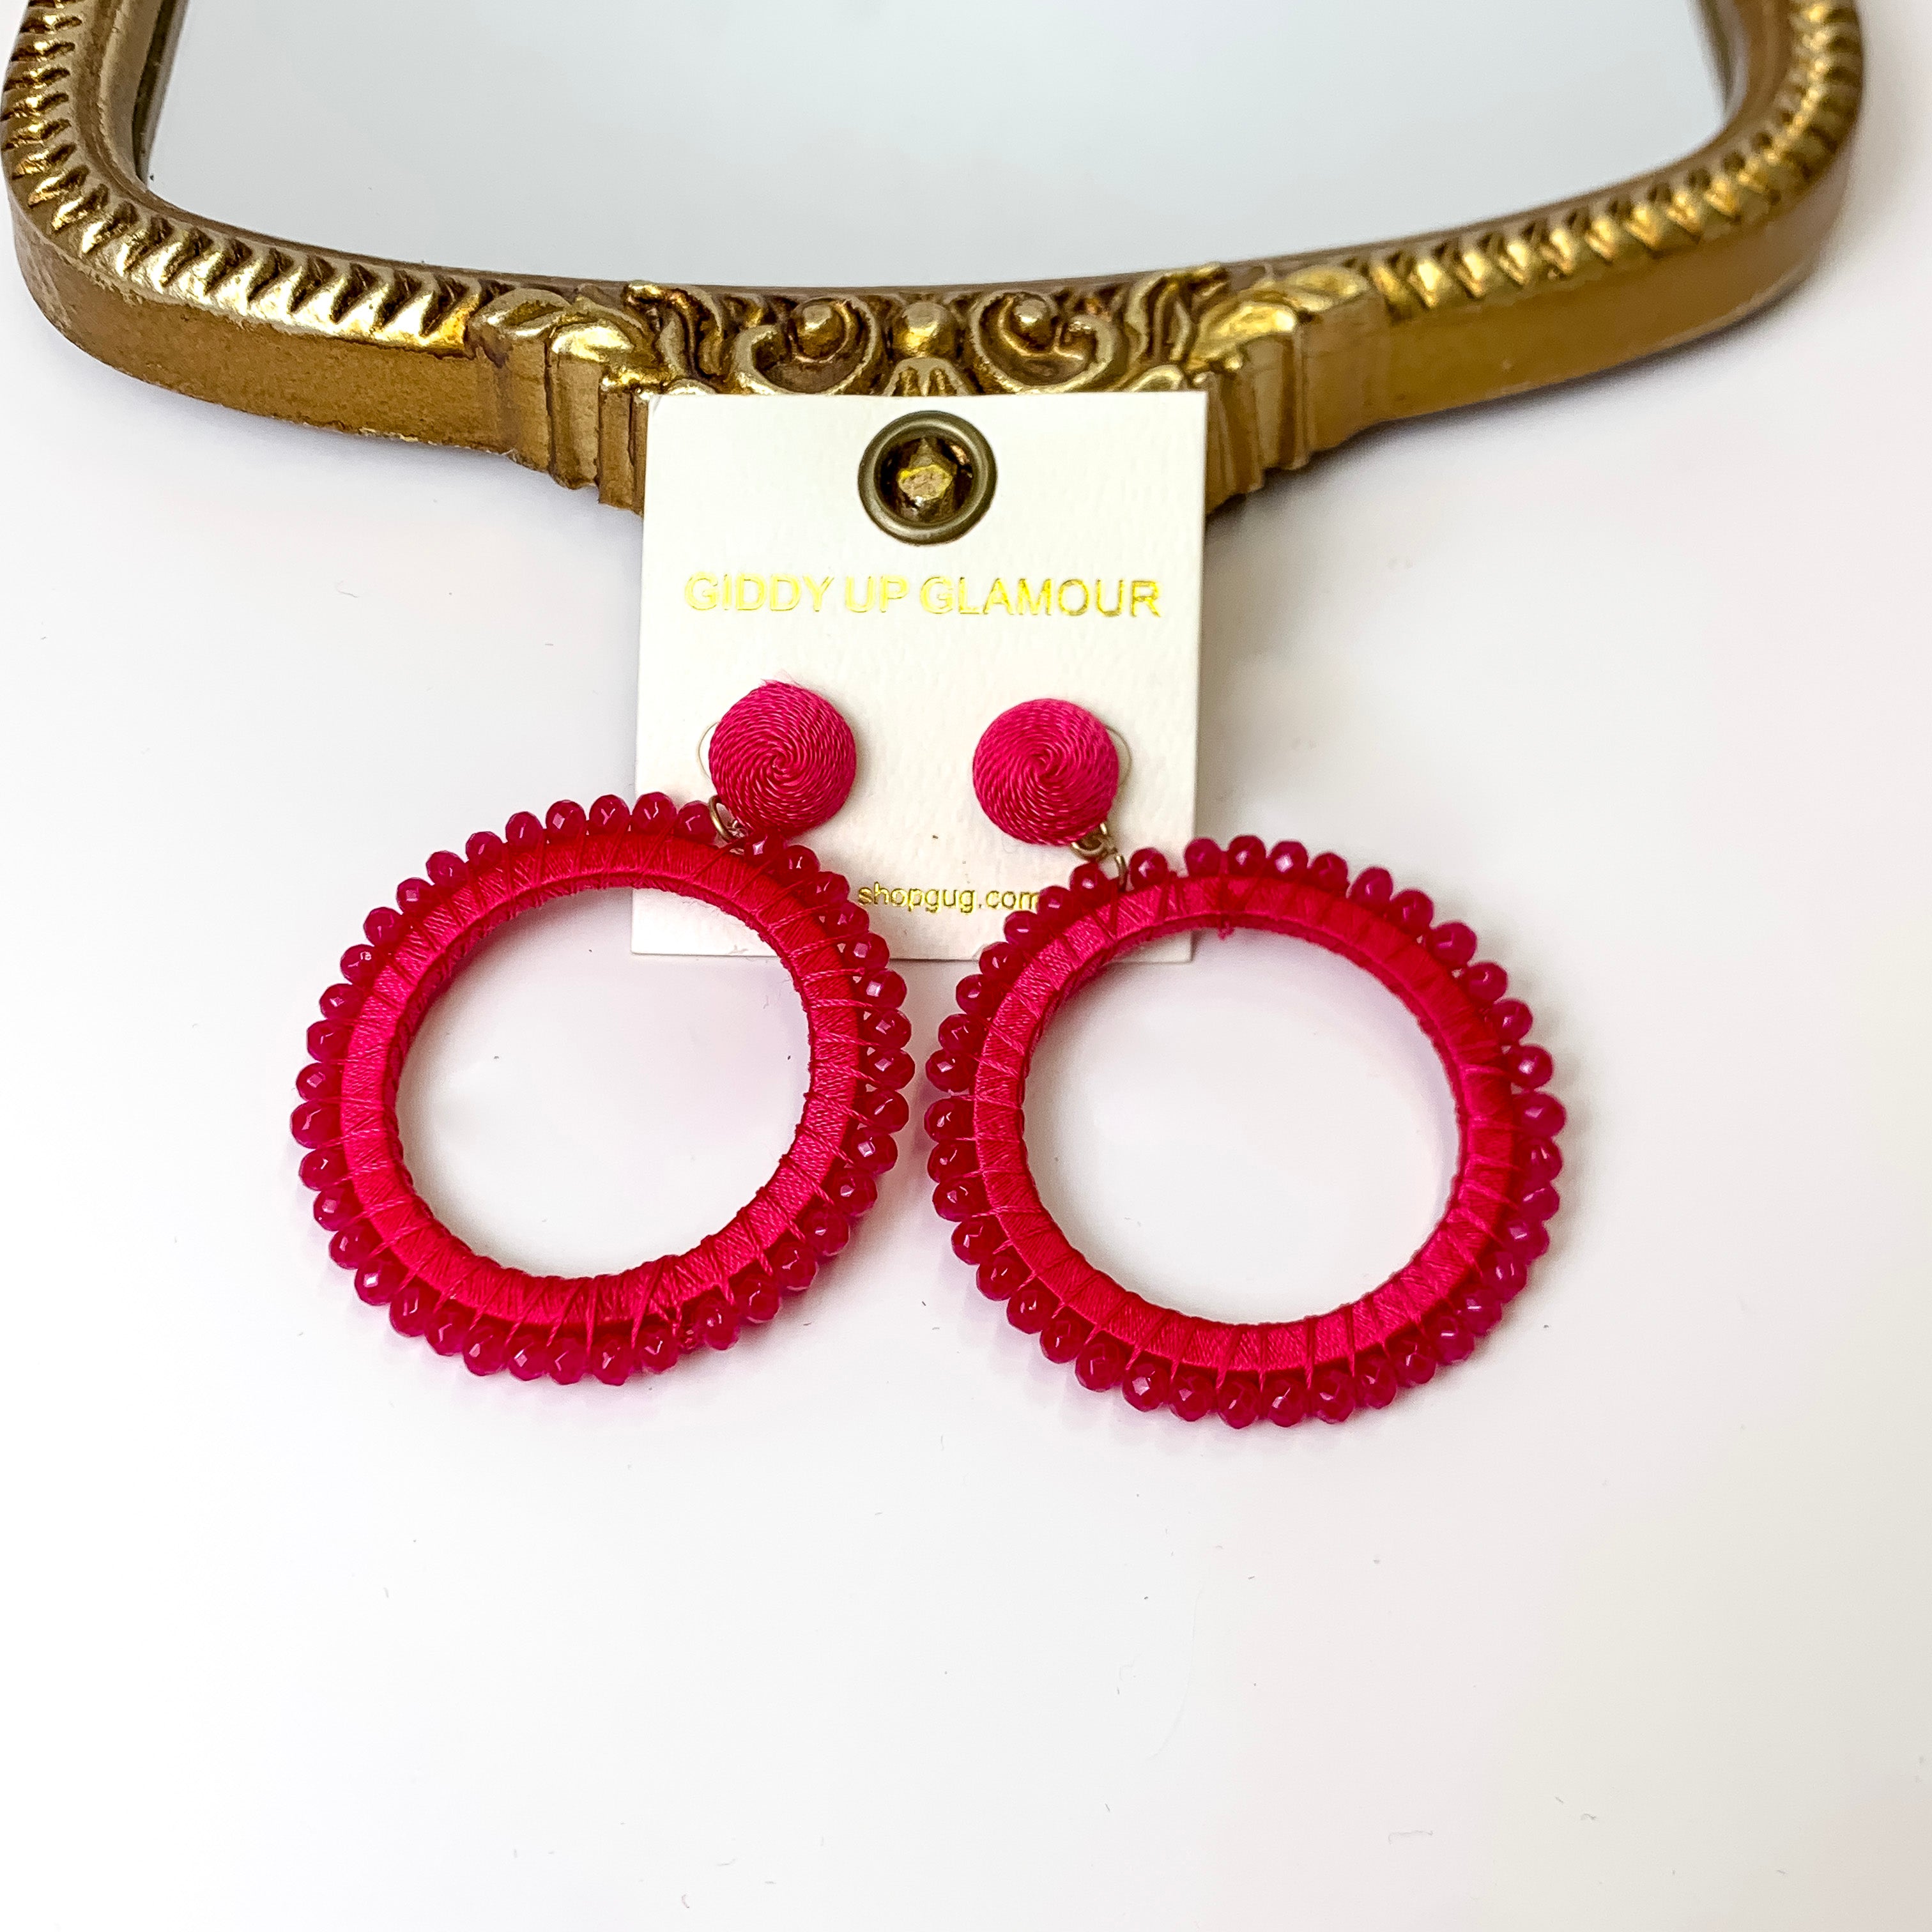 Somewhere Sunny Post Back Circle Drop Earrings with Beads in Fuchsia Pink - Giddy Up Glamour Boutique